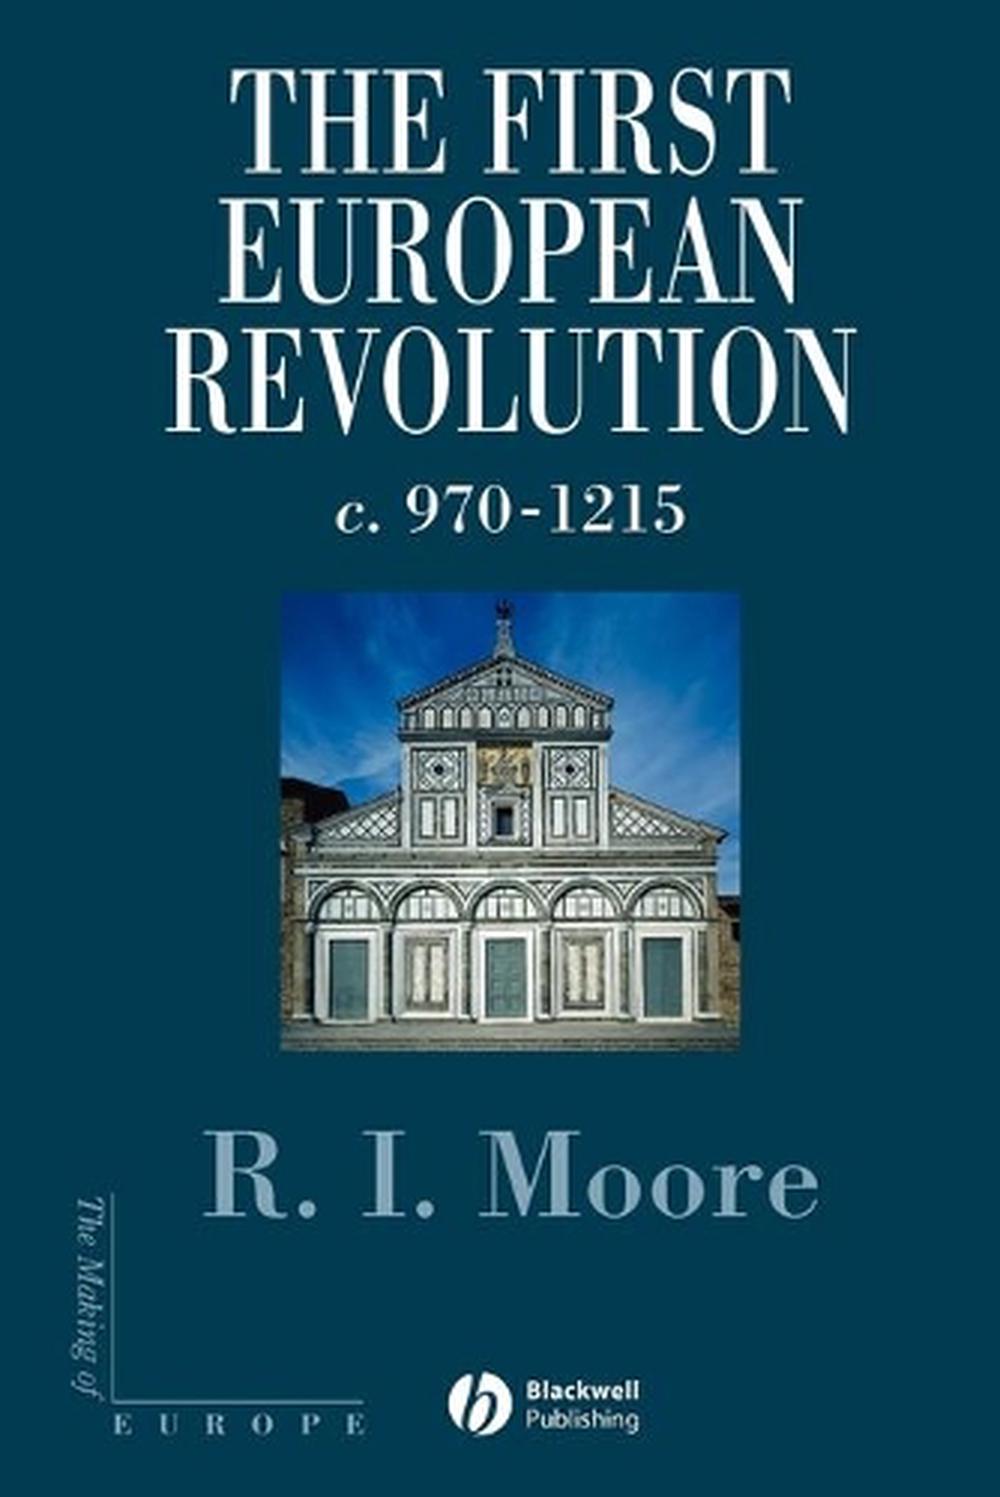 The First European Revolution by R.I. Moore